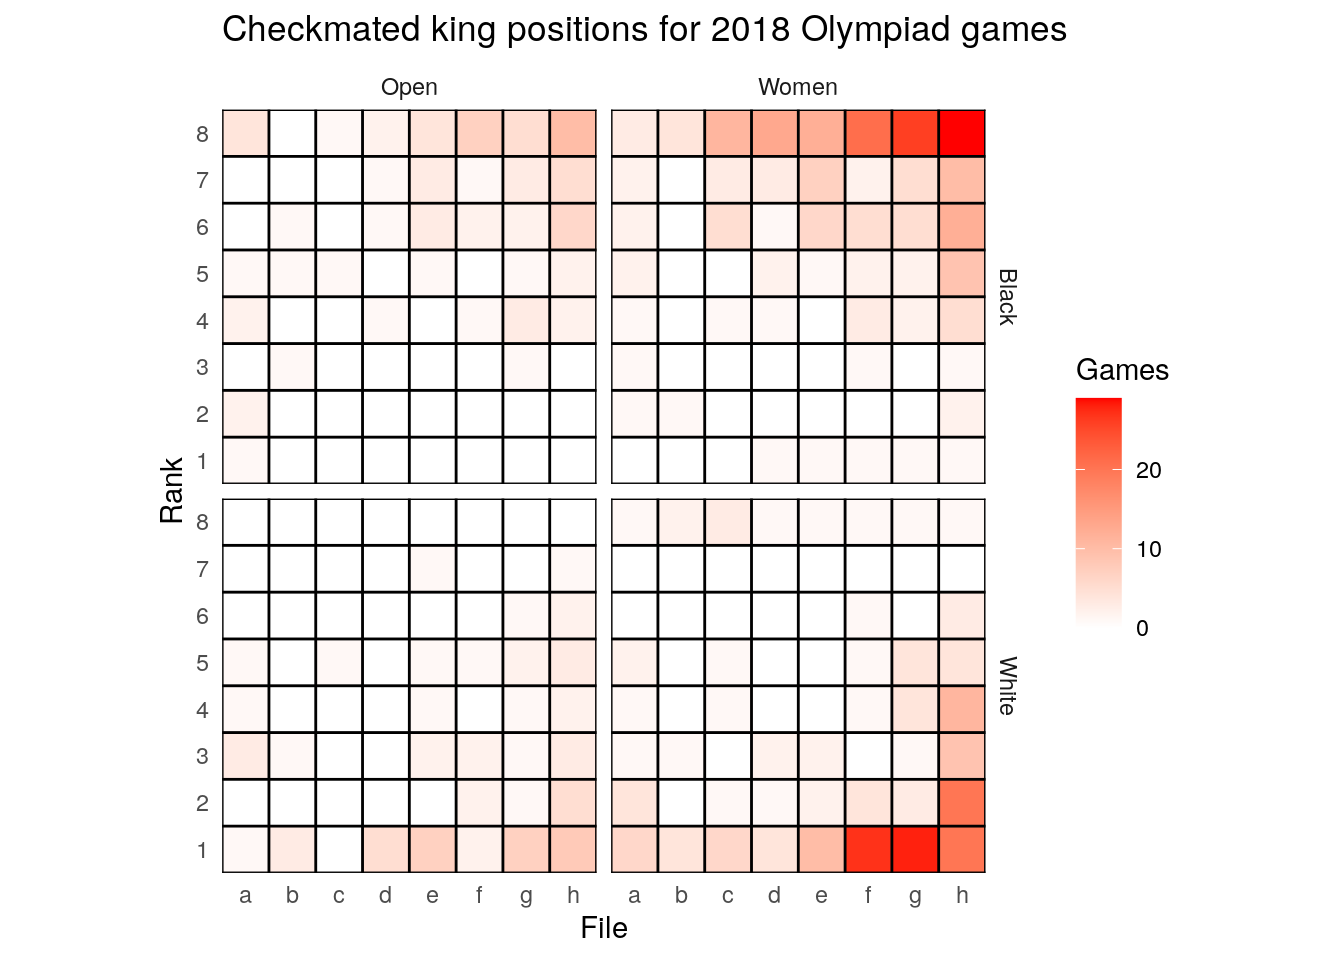 Checkmated king positions for 2018 Olympiad games